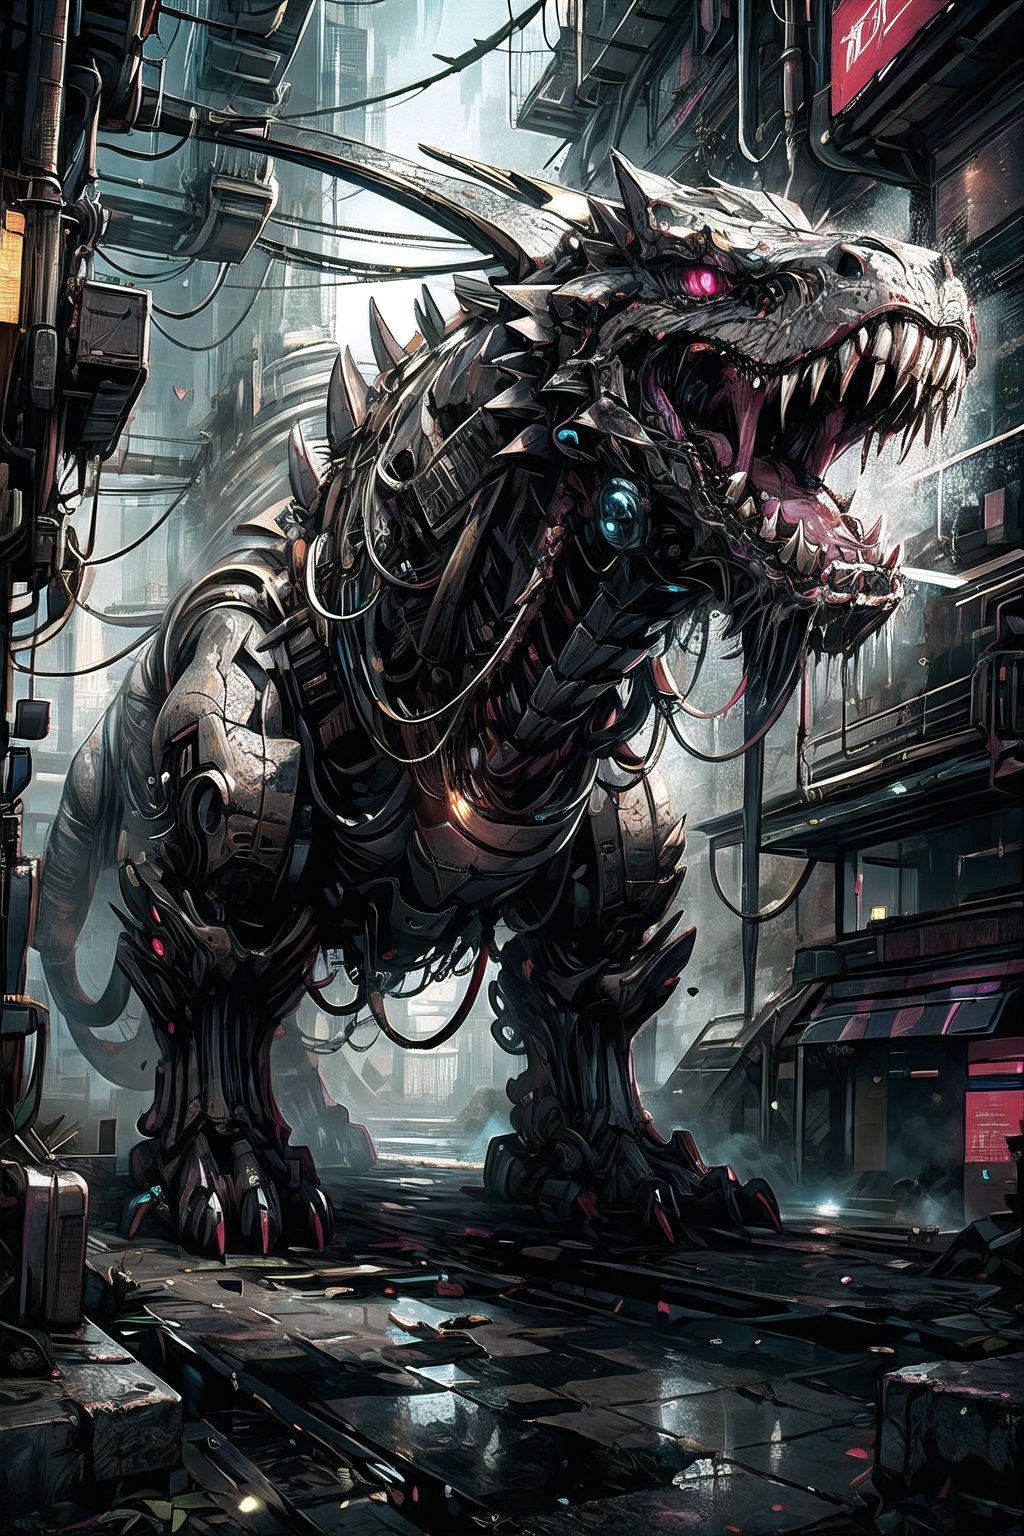 Realistic, futuristic, 8K, high_resolution, cinematic, (detailed:1.5),city , cyberpunk background, future, external light, roar, metal claw,mechanical buddy universe,destruction, In the dystopian realm of the future, Jurassic Park stands as a haunting testament to humanity's unchecked technological hubris. Within its foreboding borders, the primal roar of the T-Rex now resonates with a mechanical undertone, a chilling symphony of nature and machine intertwined. This once mighty predator, the apex of prehistoric terror, has been transformed into a cybernetic monstrosity, its massive form adorned with gleaming biomechanical enhancements. As its scaled hide peels away, a labyrinth of circuitry is unveiled, a heart of vengeful machinery forged from resentment and animosity. In the glare of its crimson eyes, the T-Rex's gaze burns with a cold, calculated fury, a testament to the triumph of dark ambitions over the sanctity of nature.

